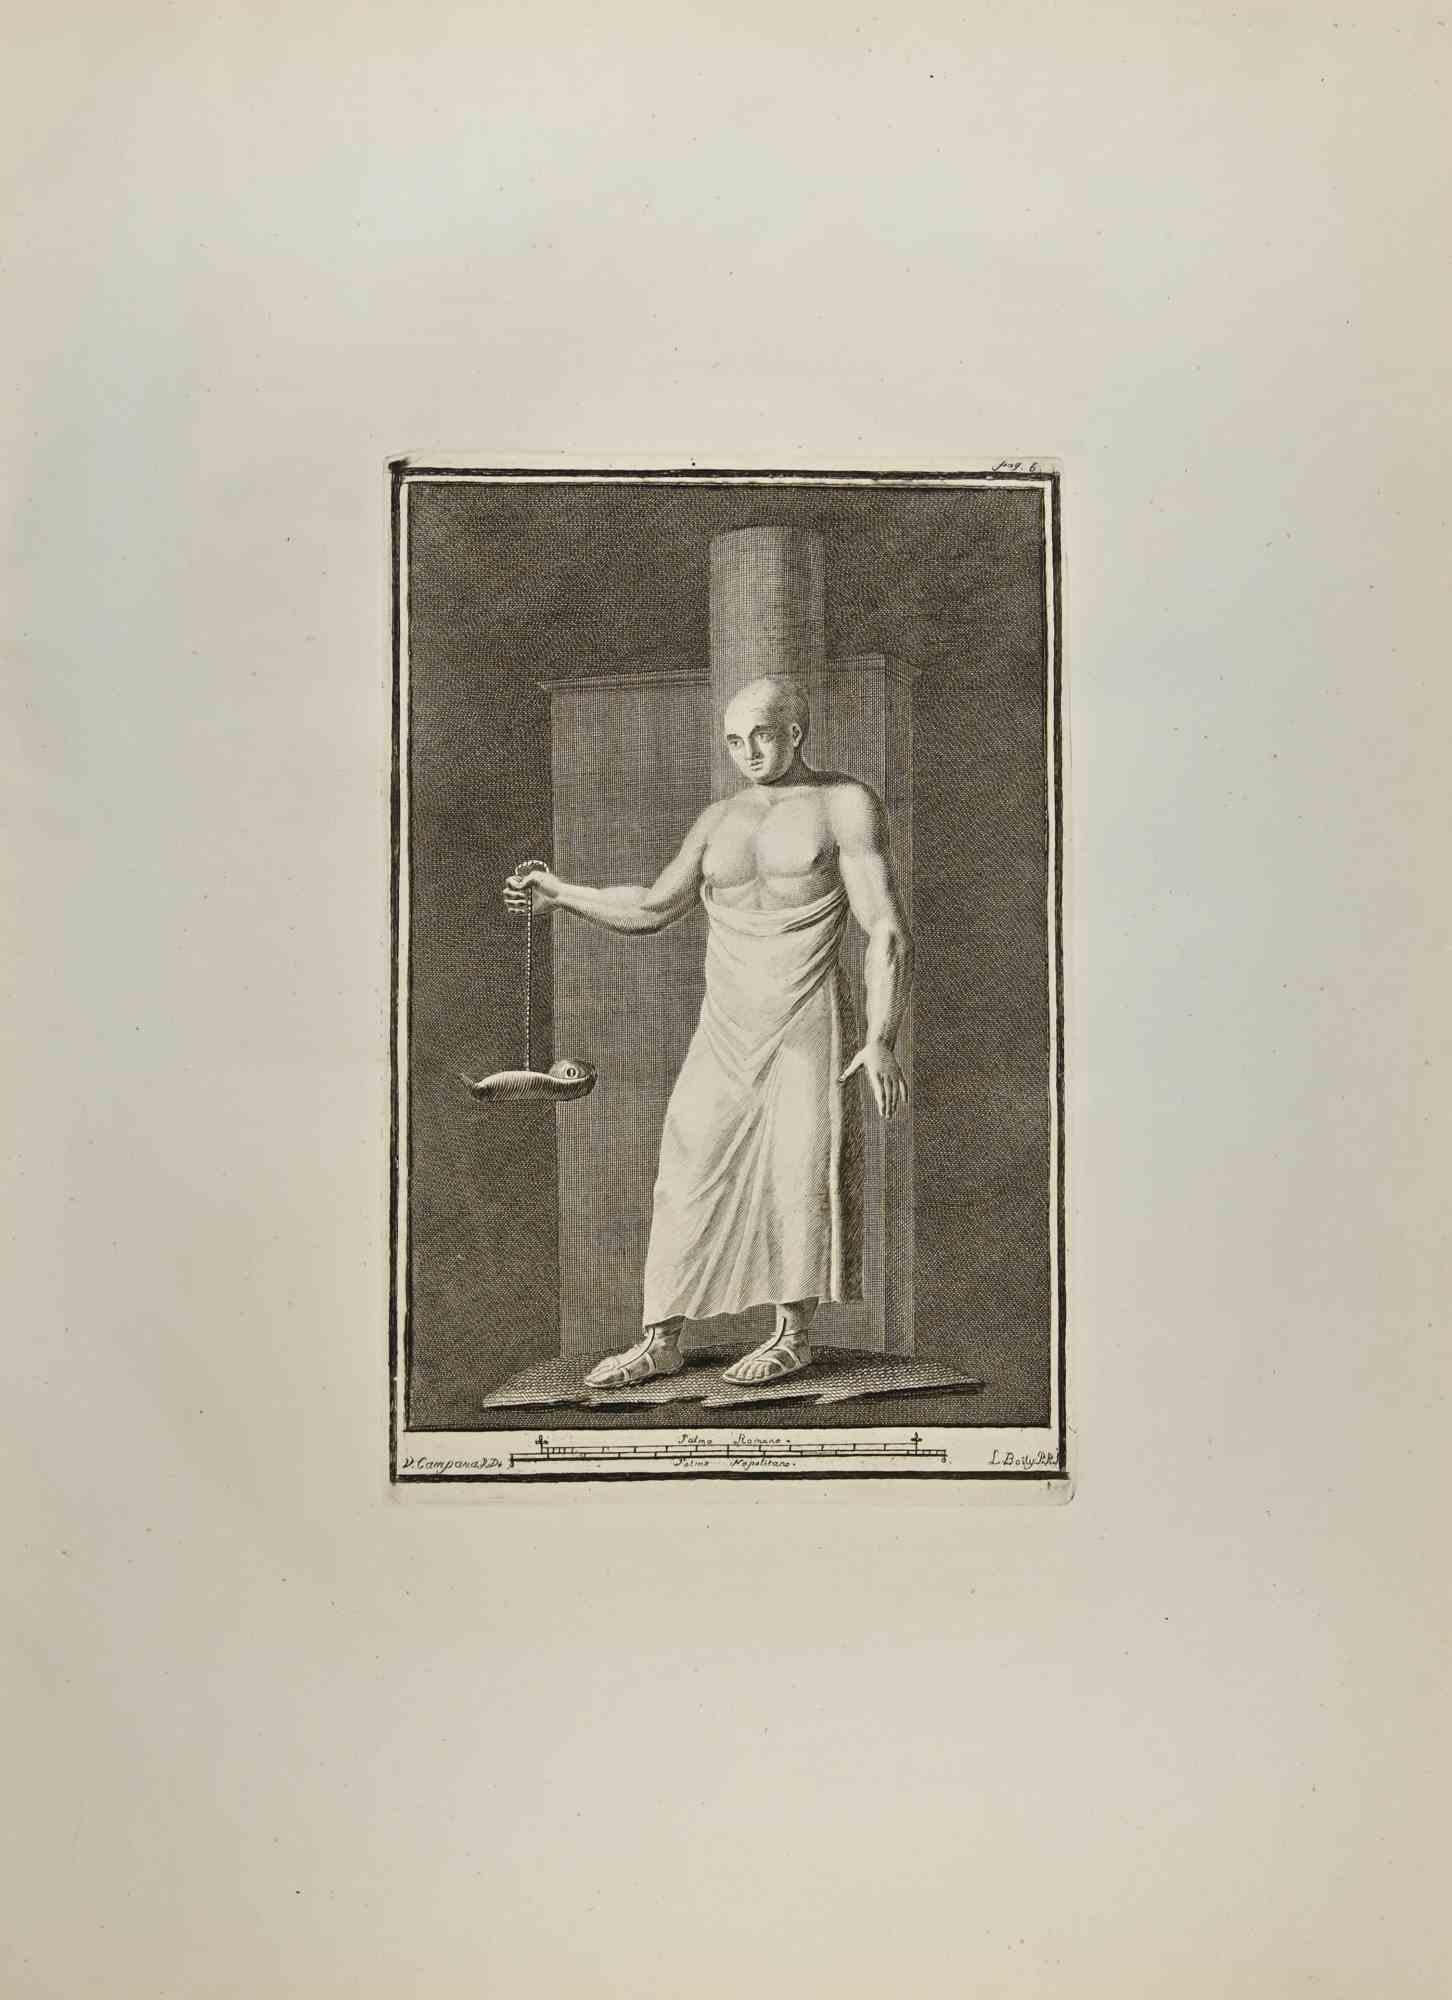 Ludovico Boily Figurative Print - Man With  Lamp - Etching by L. Boily - 18th Century